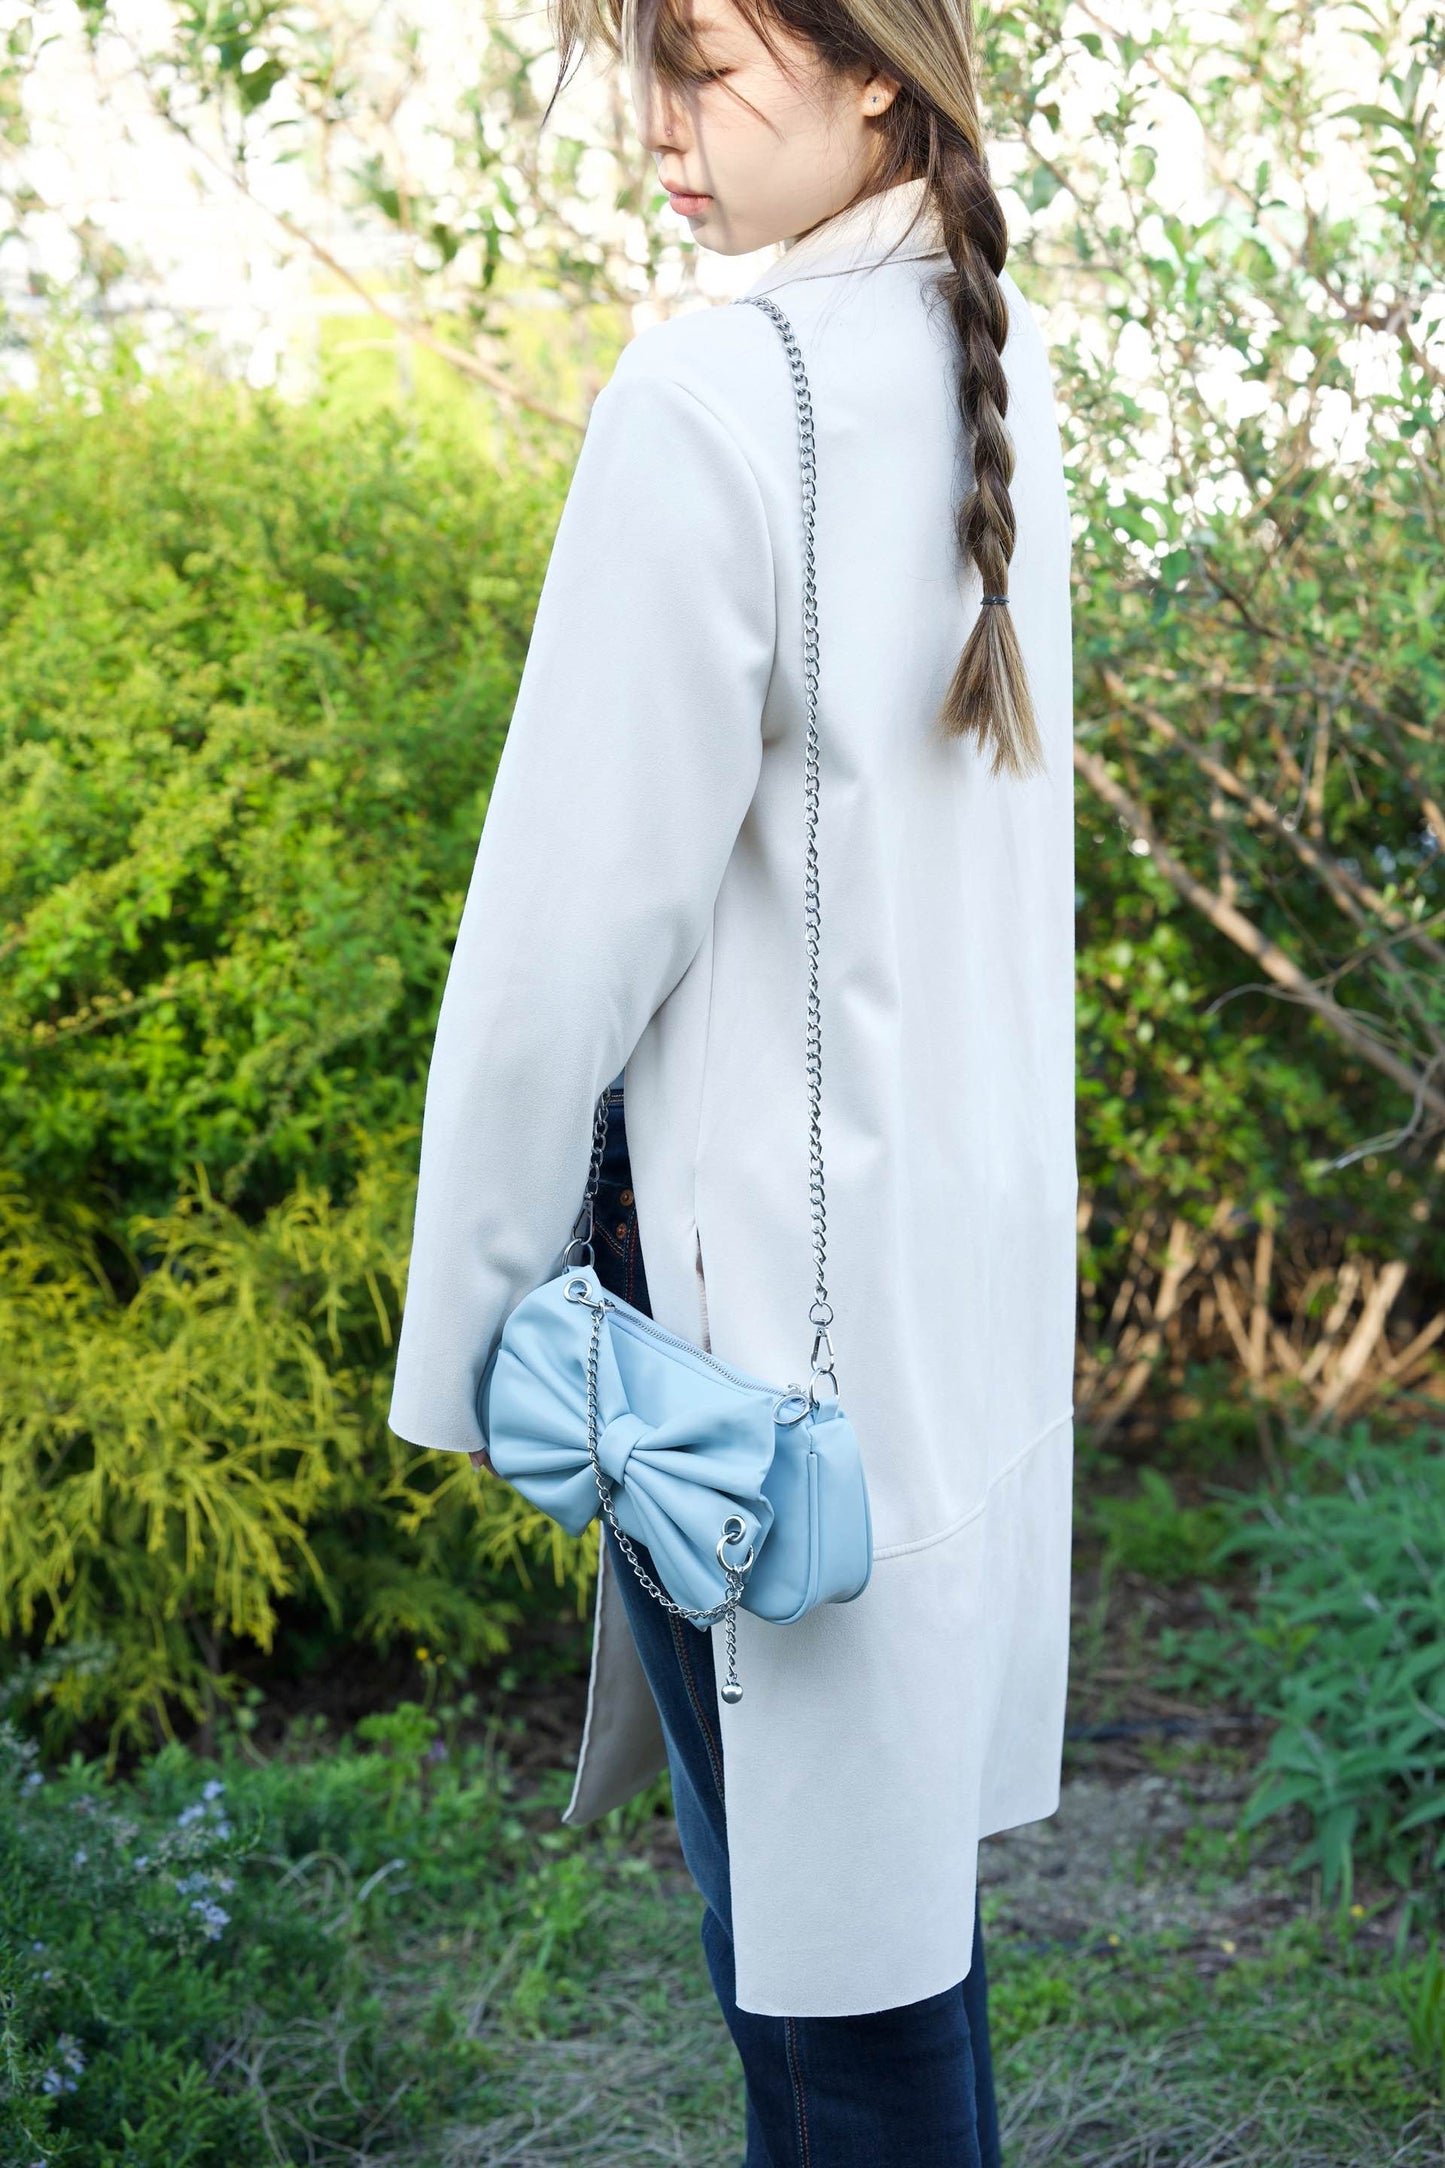 Baby Blue Leather Purse